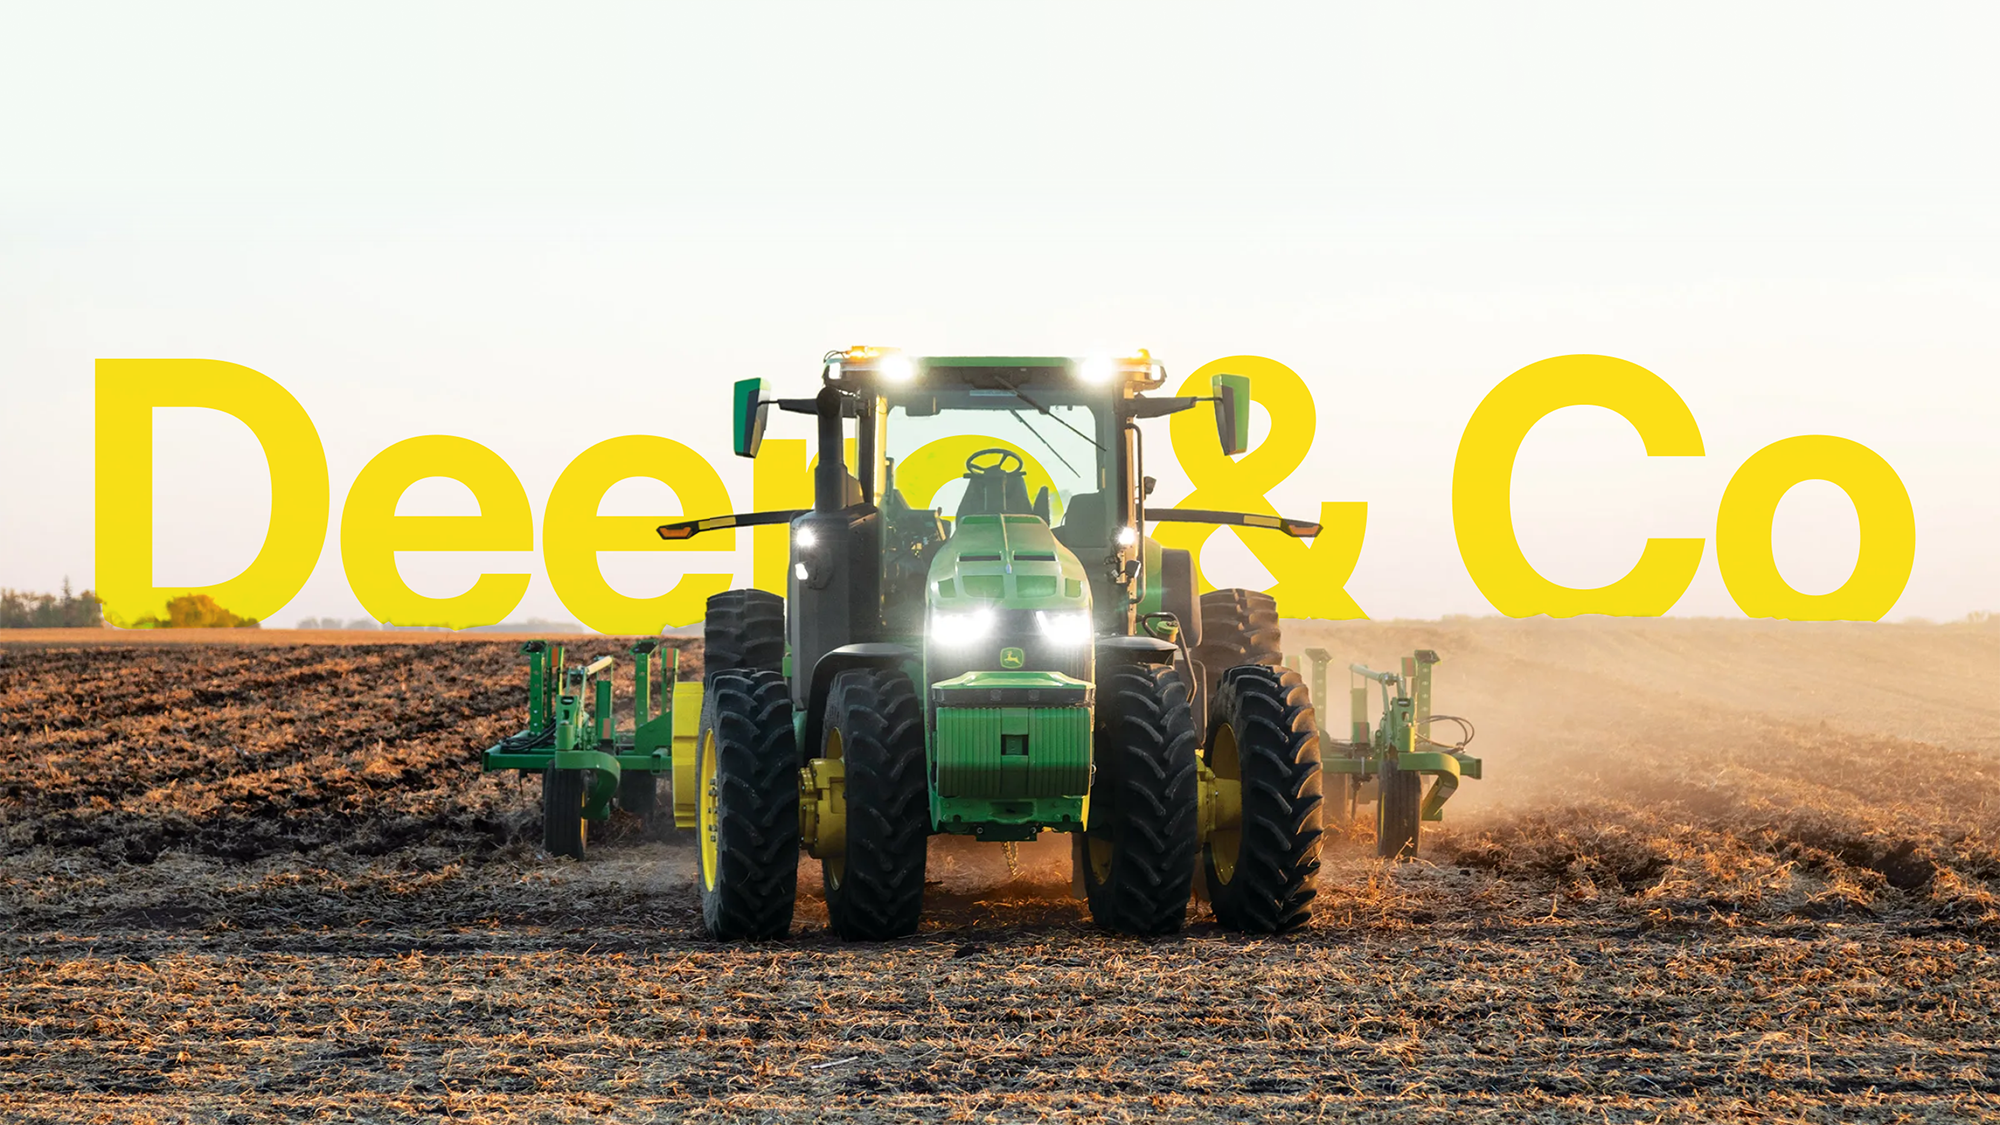 Deere & Co: A global leader in agriculture & construction equipment since 1837